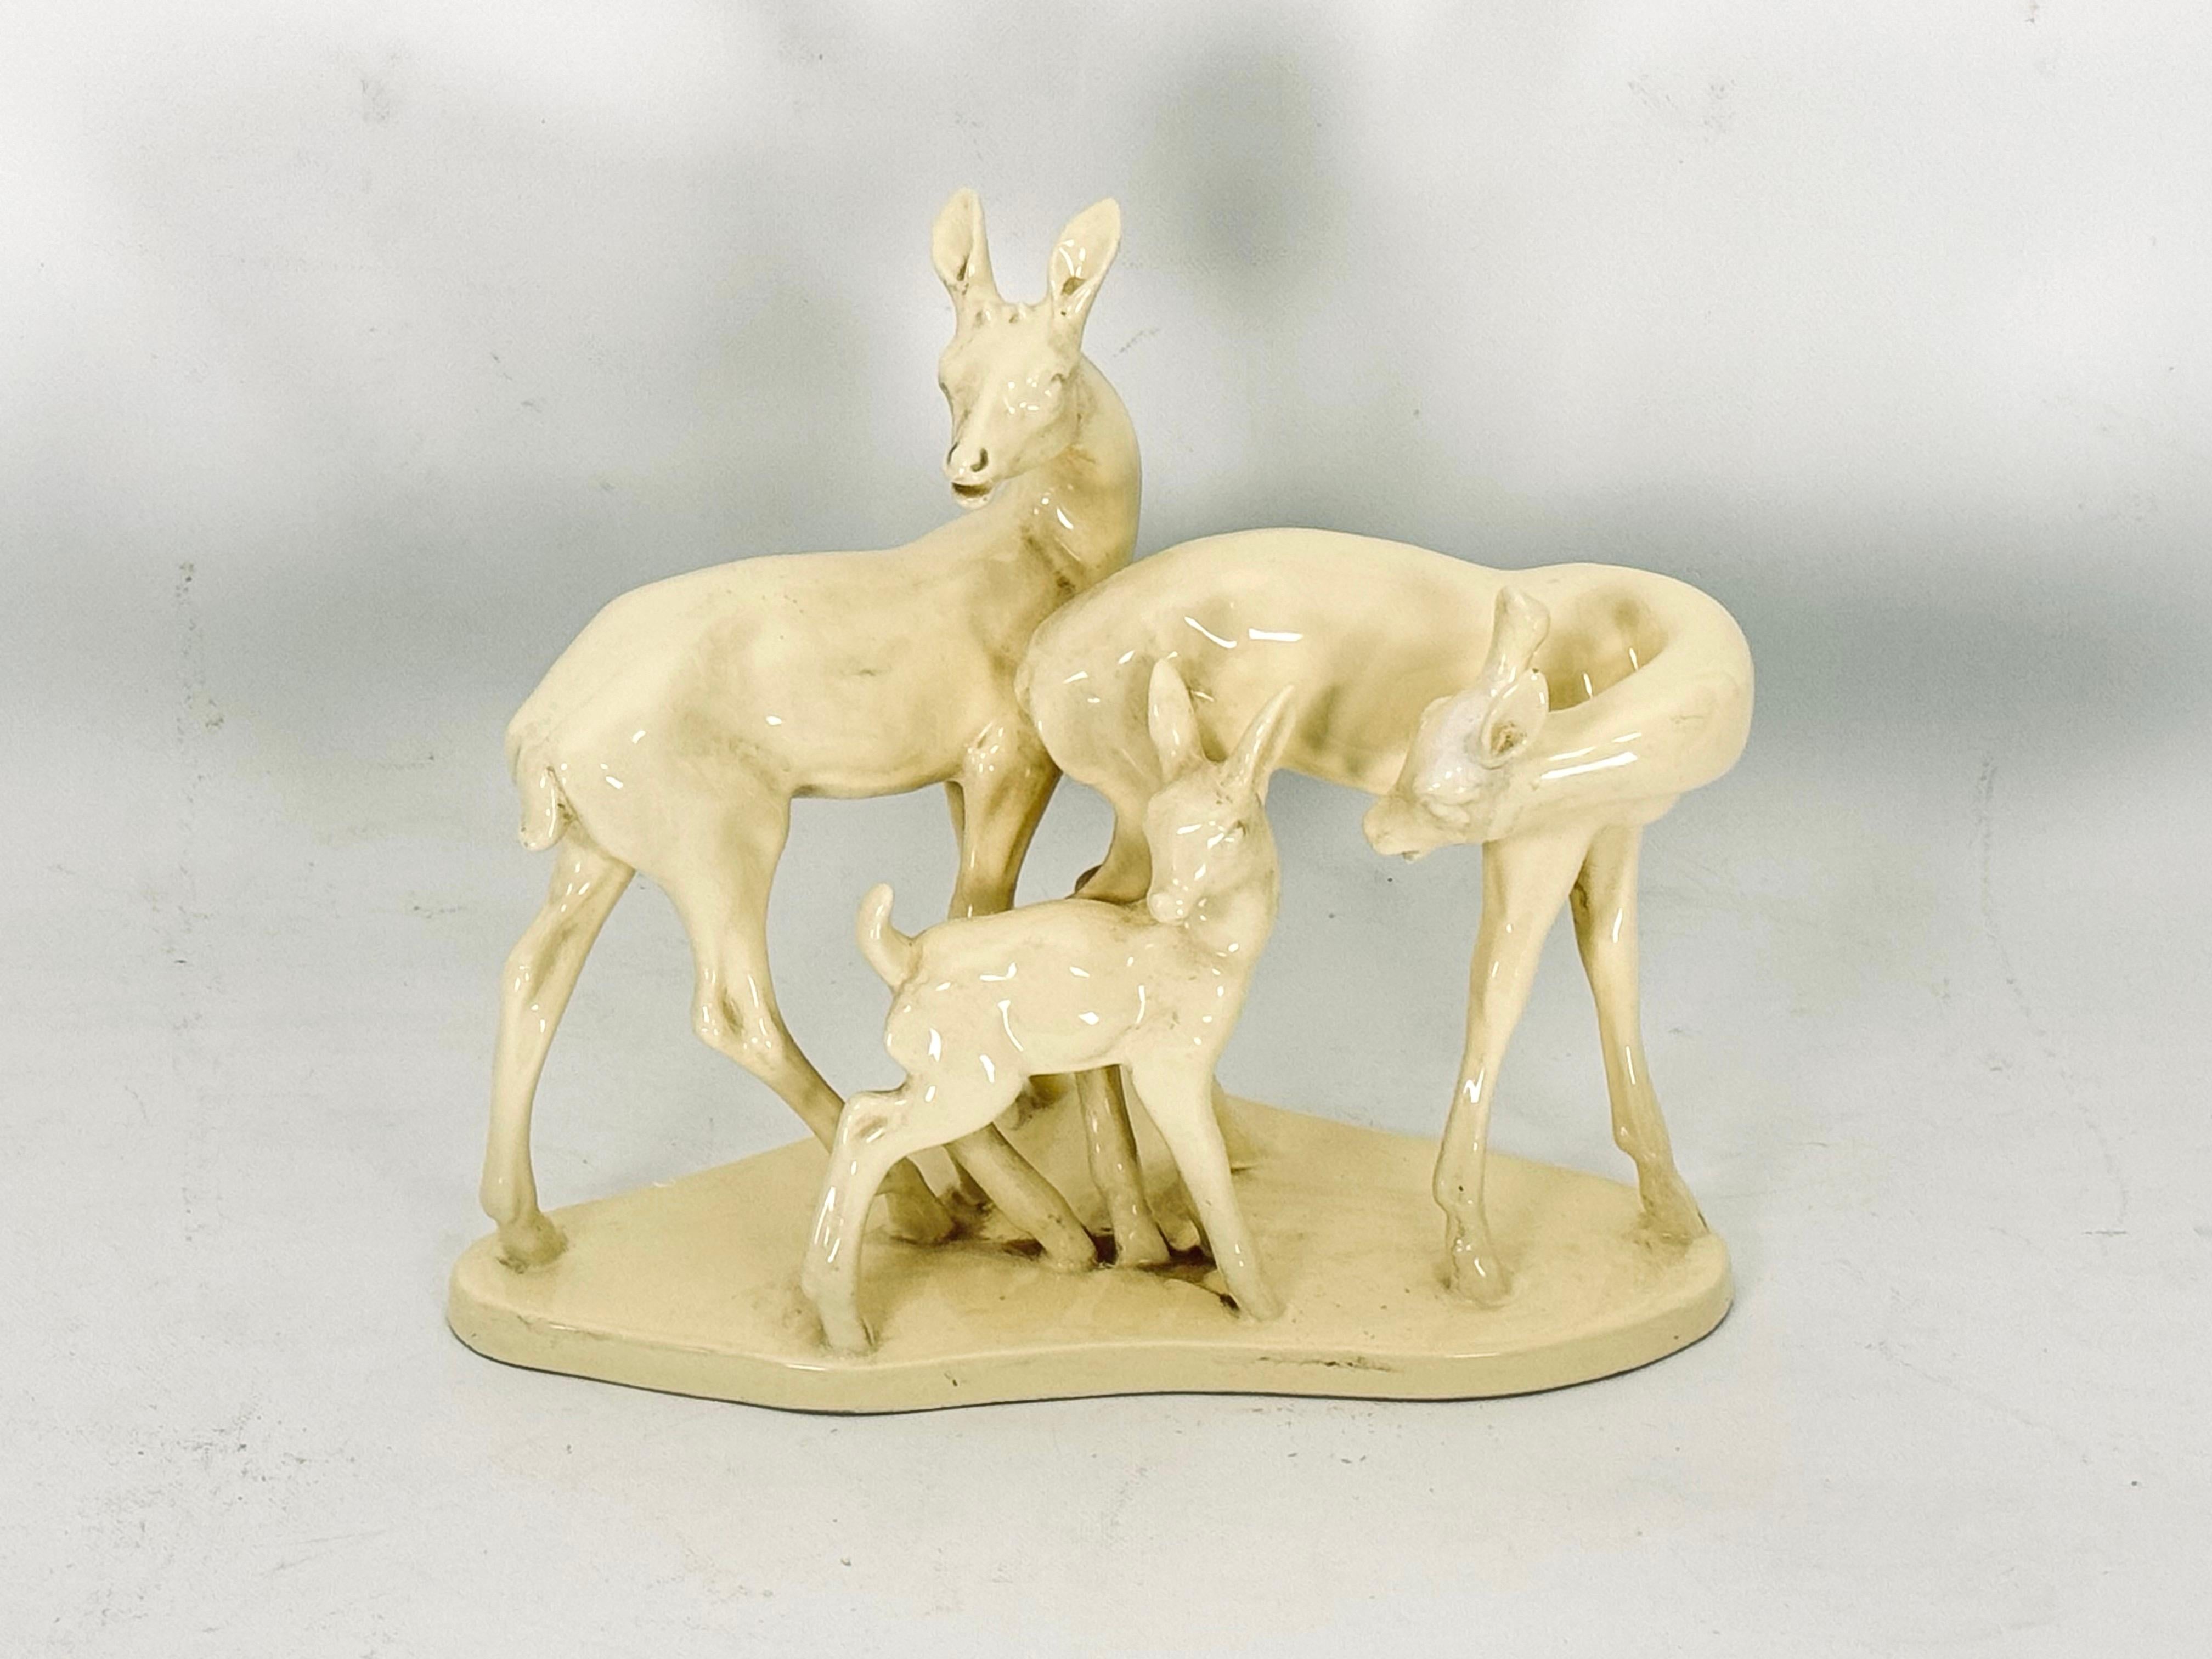 Ceramic sculpture representing a family of young deer in good vintage condition with trace of age and use. Produced in Italy during the 50s
